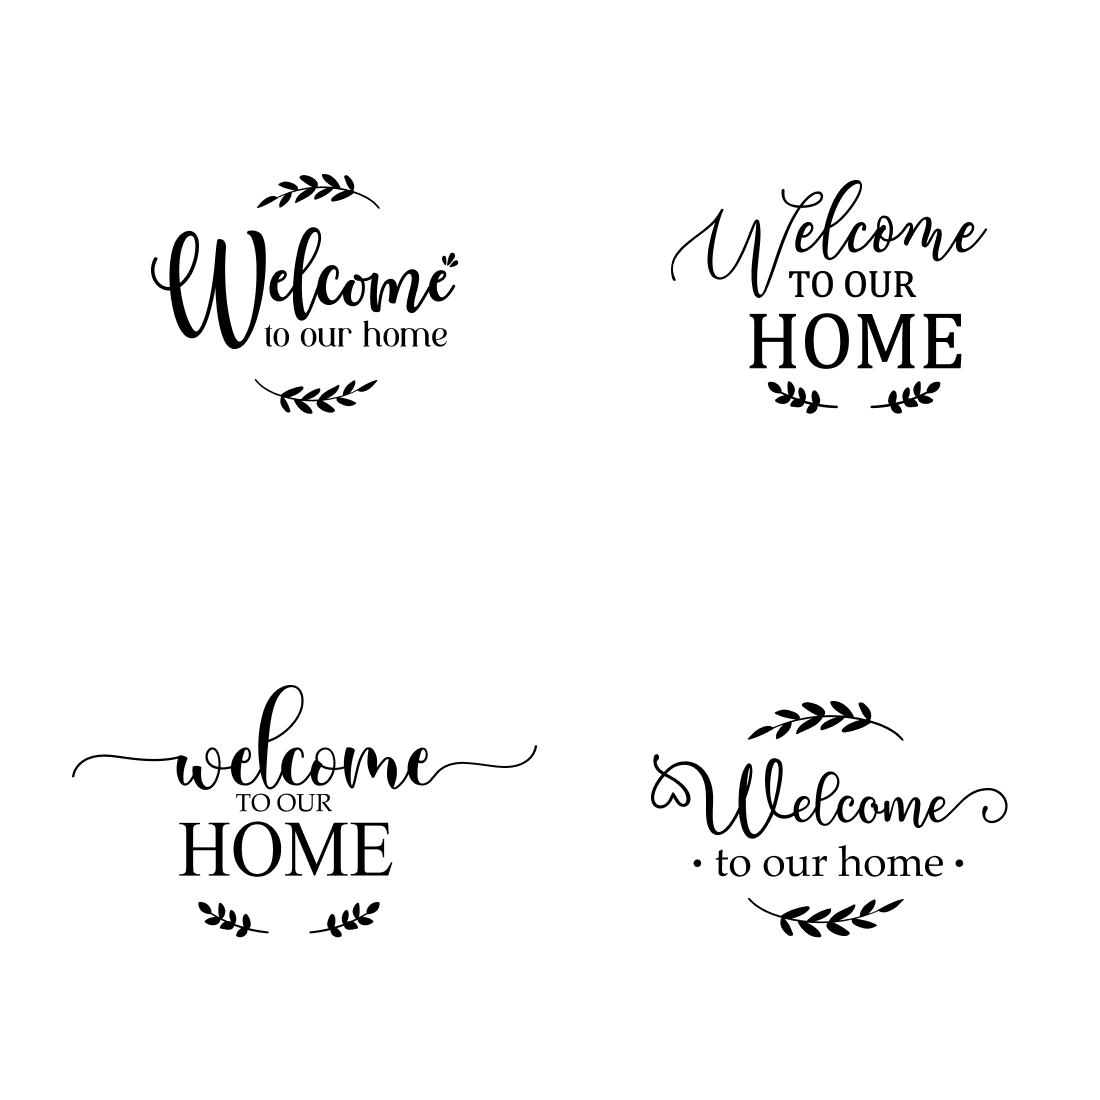 Welcome to our home svg bundle cover.